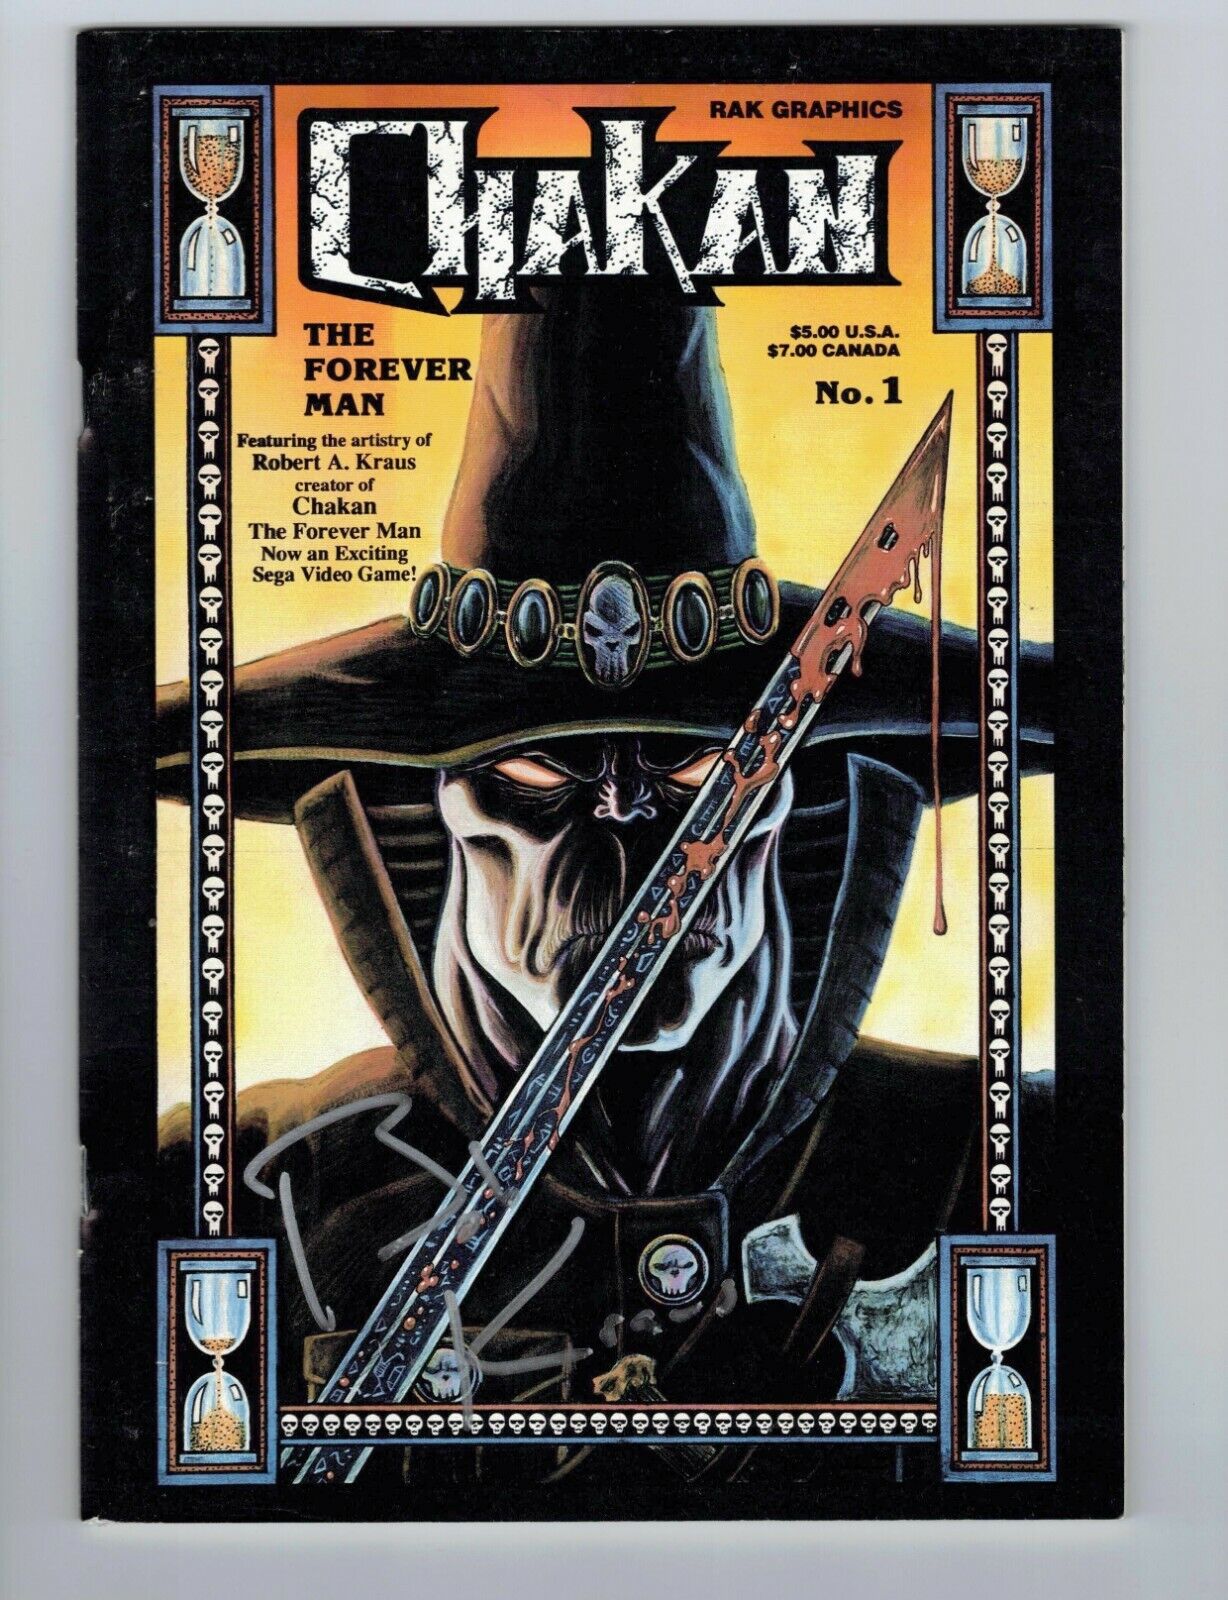 Chakan: the Forever Man #1 VF+ signed with sketch by Bob Kraus RAK one-shot 2nd